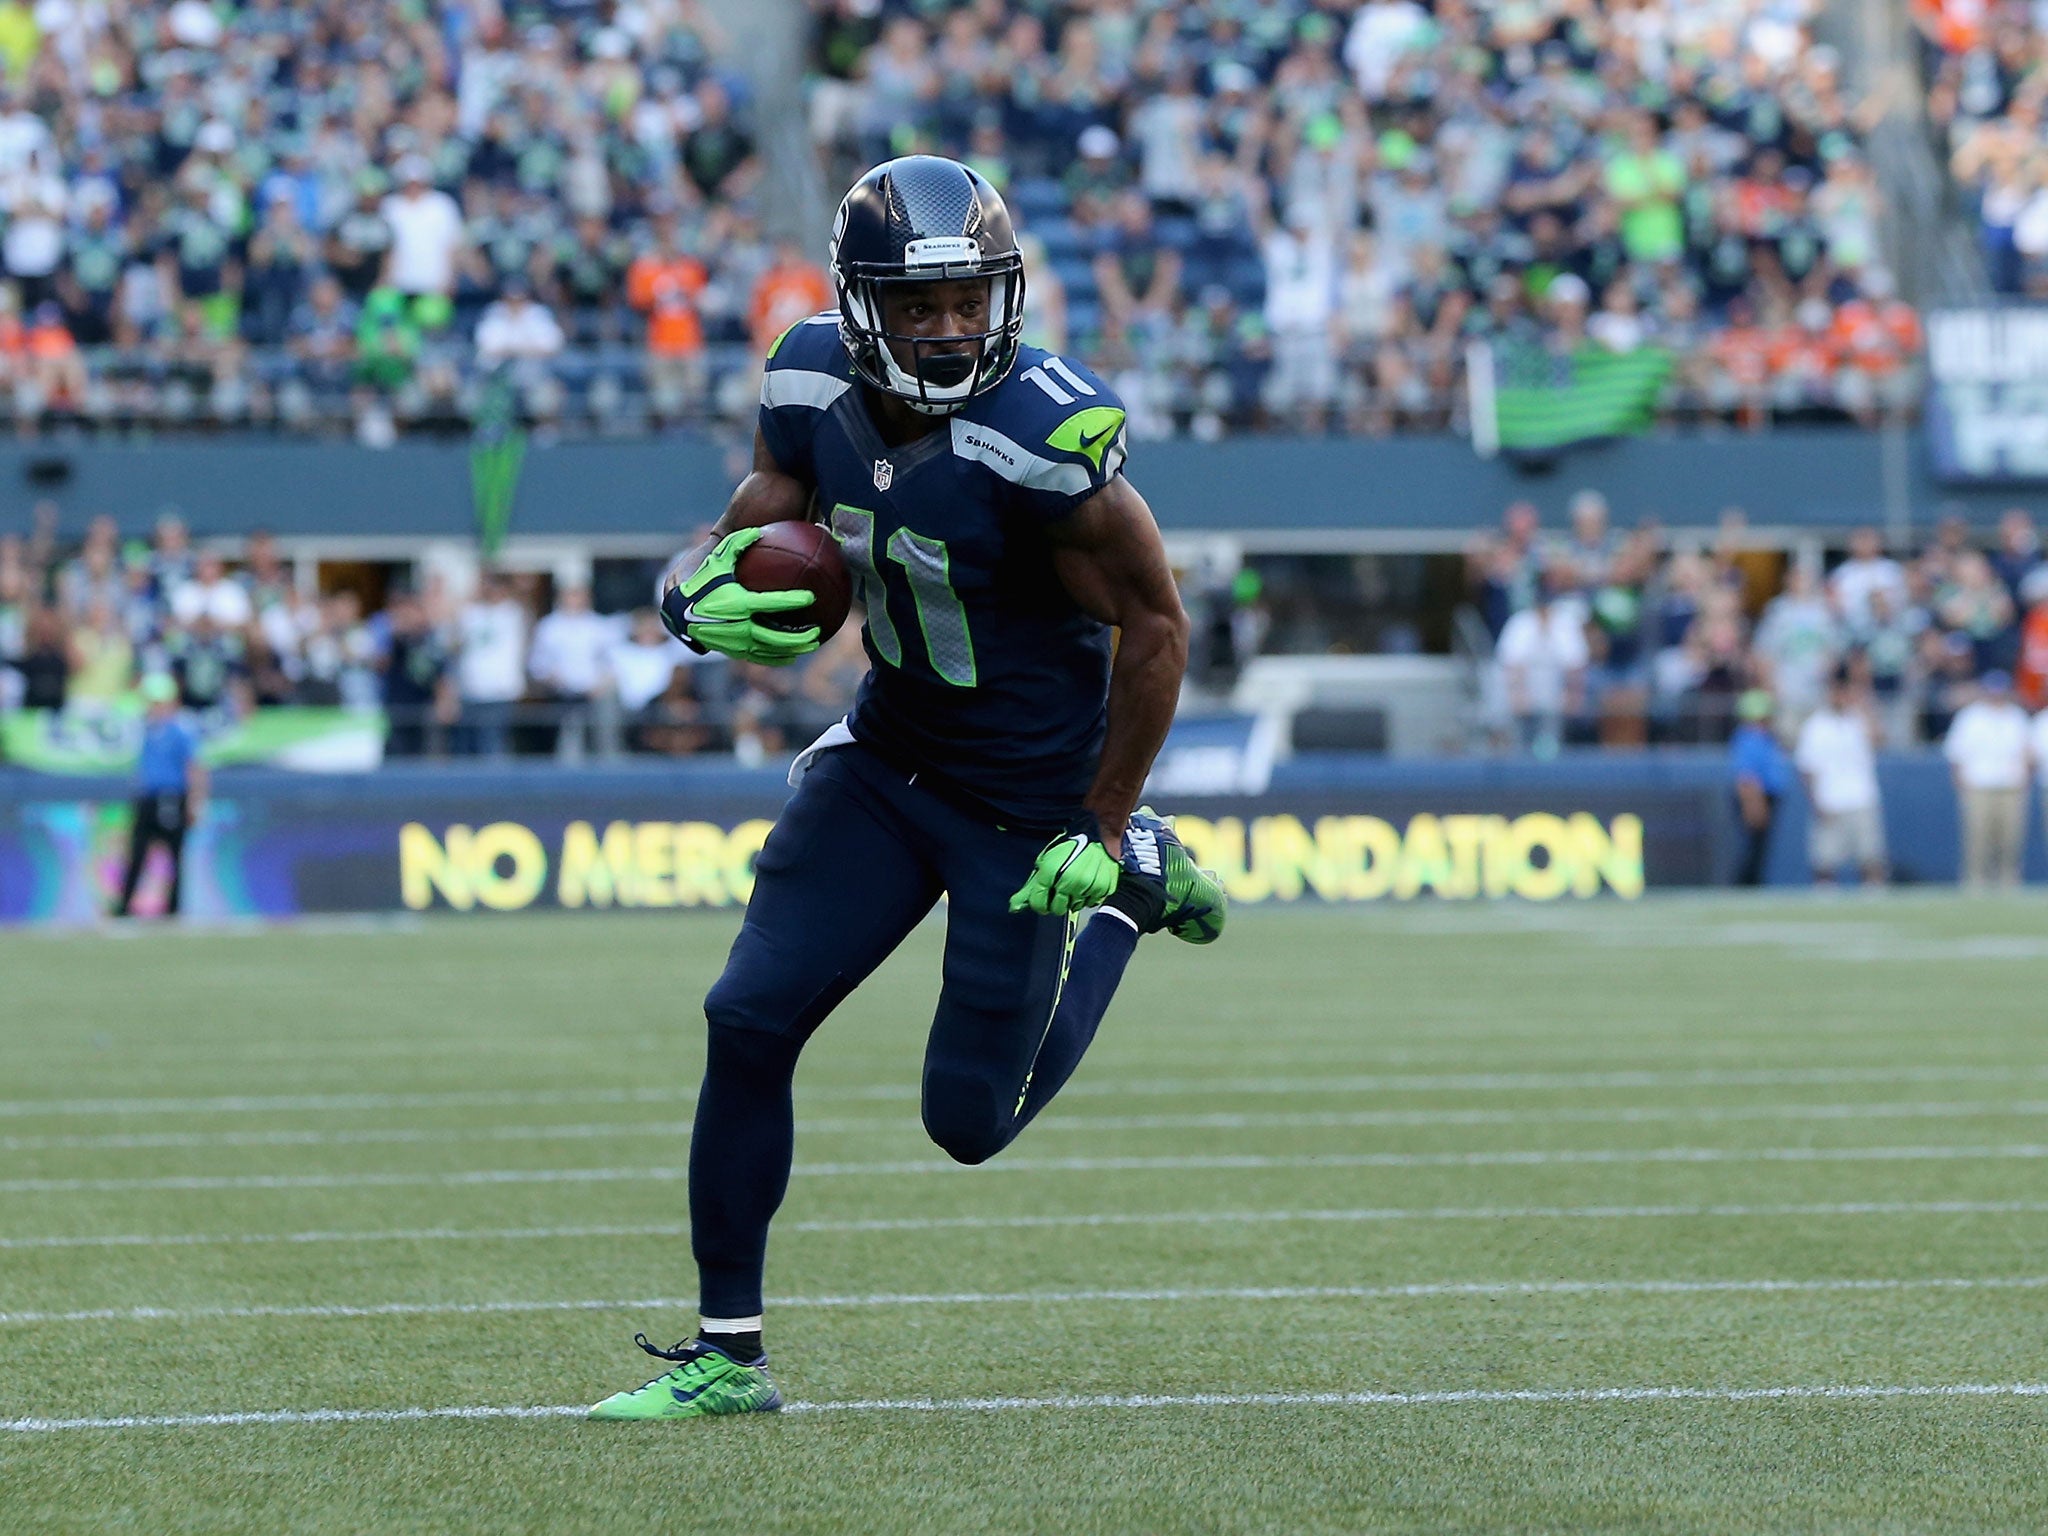 Percy Harvin has been traded by the Seattle Seahawks to the New York Jets